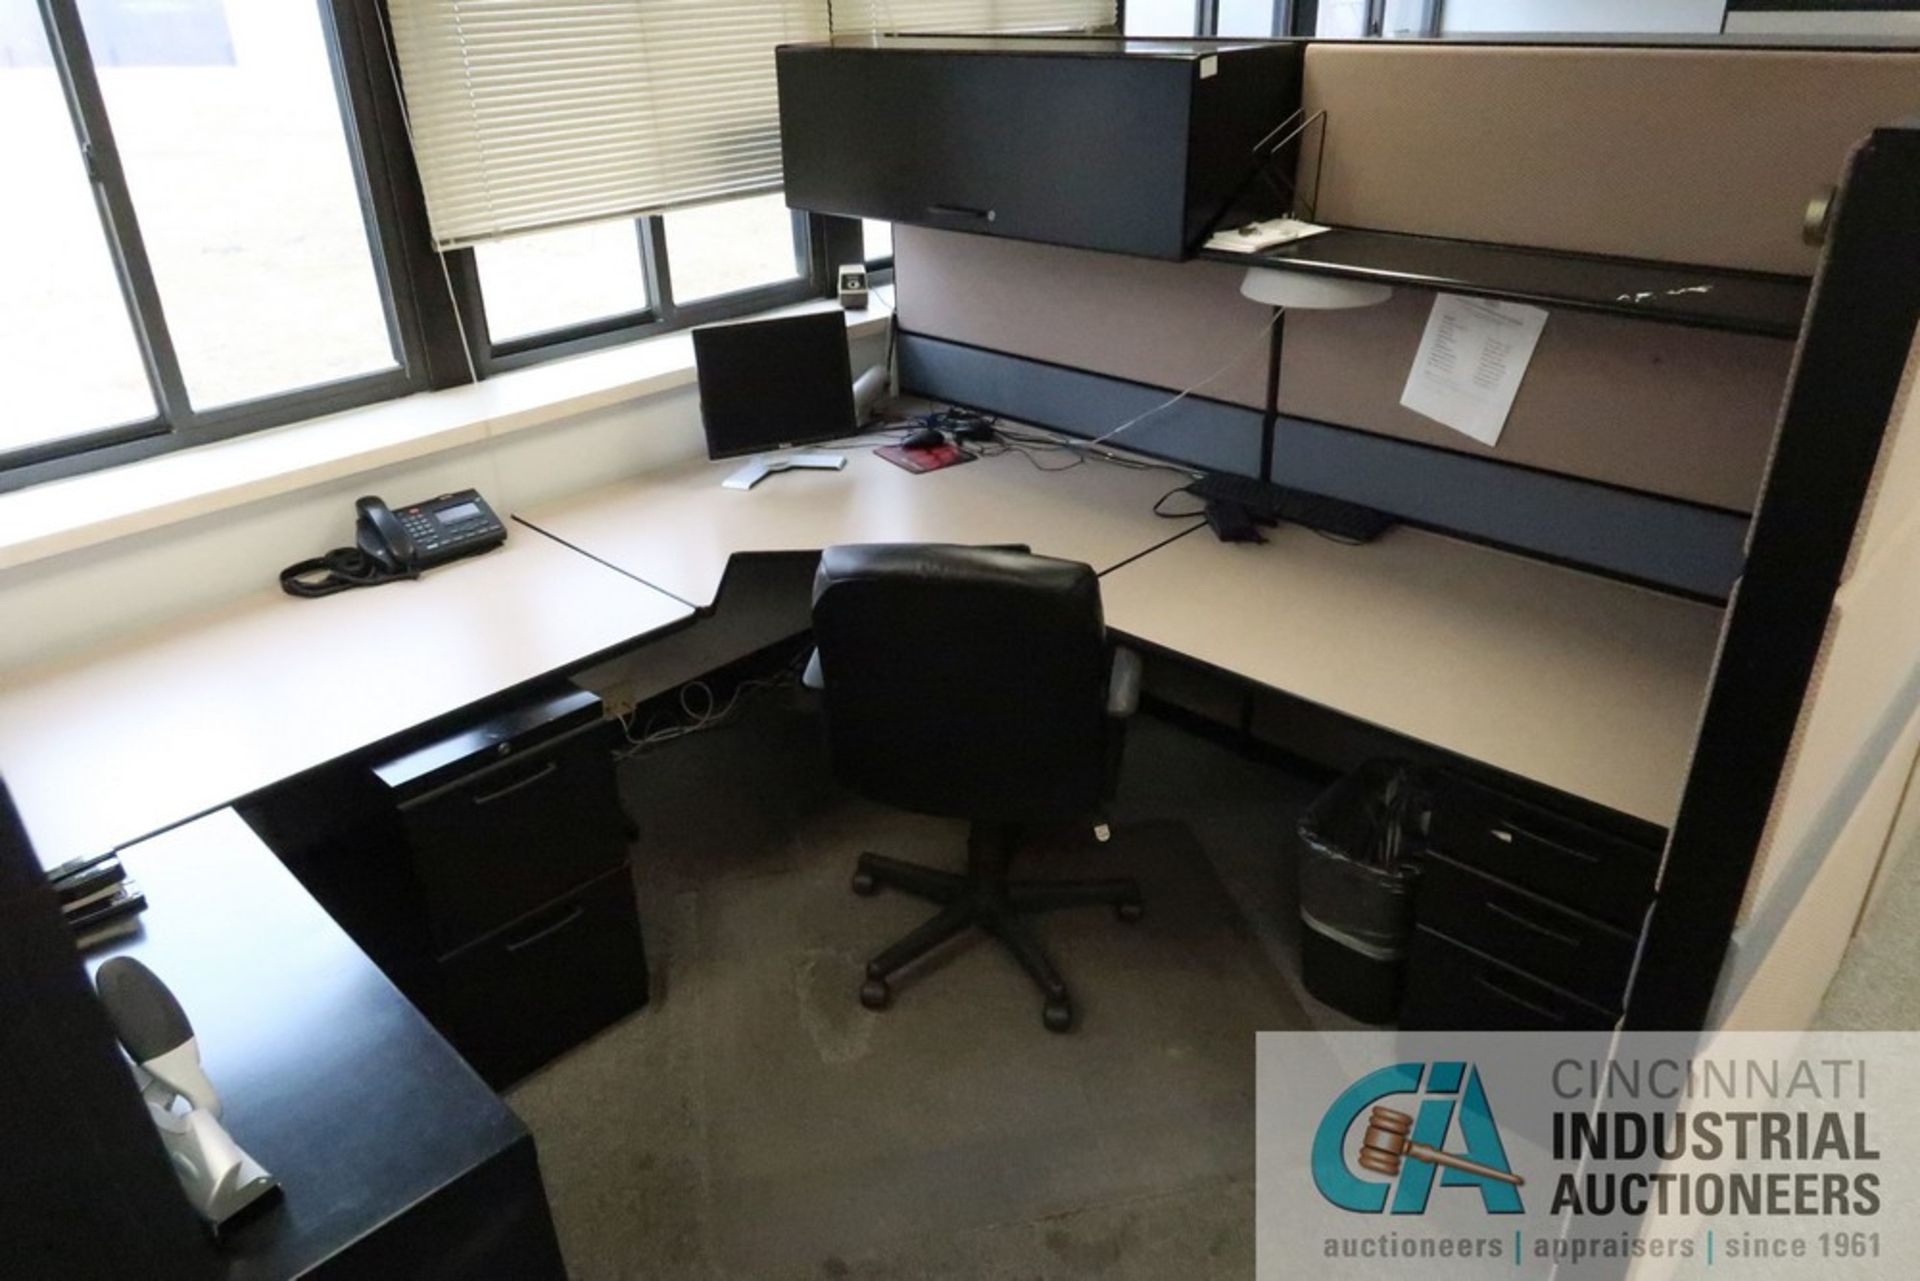 (LOT) (4) CUBICLES, 96" X 96" L-SHAPED DESKS, (4) EXECUTIVE CHAIRS, (3) SIDE CHAIRS, FILE CABINETS - Image 4 of 6